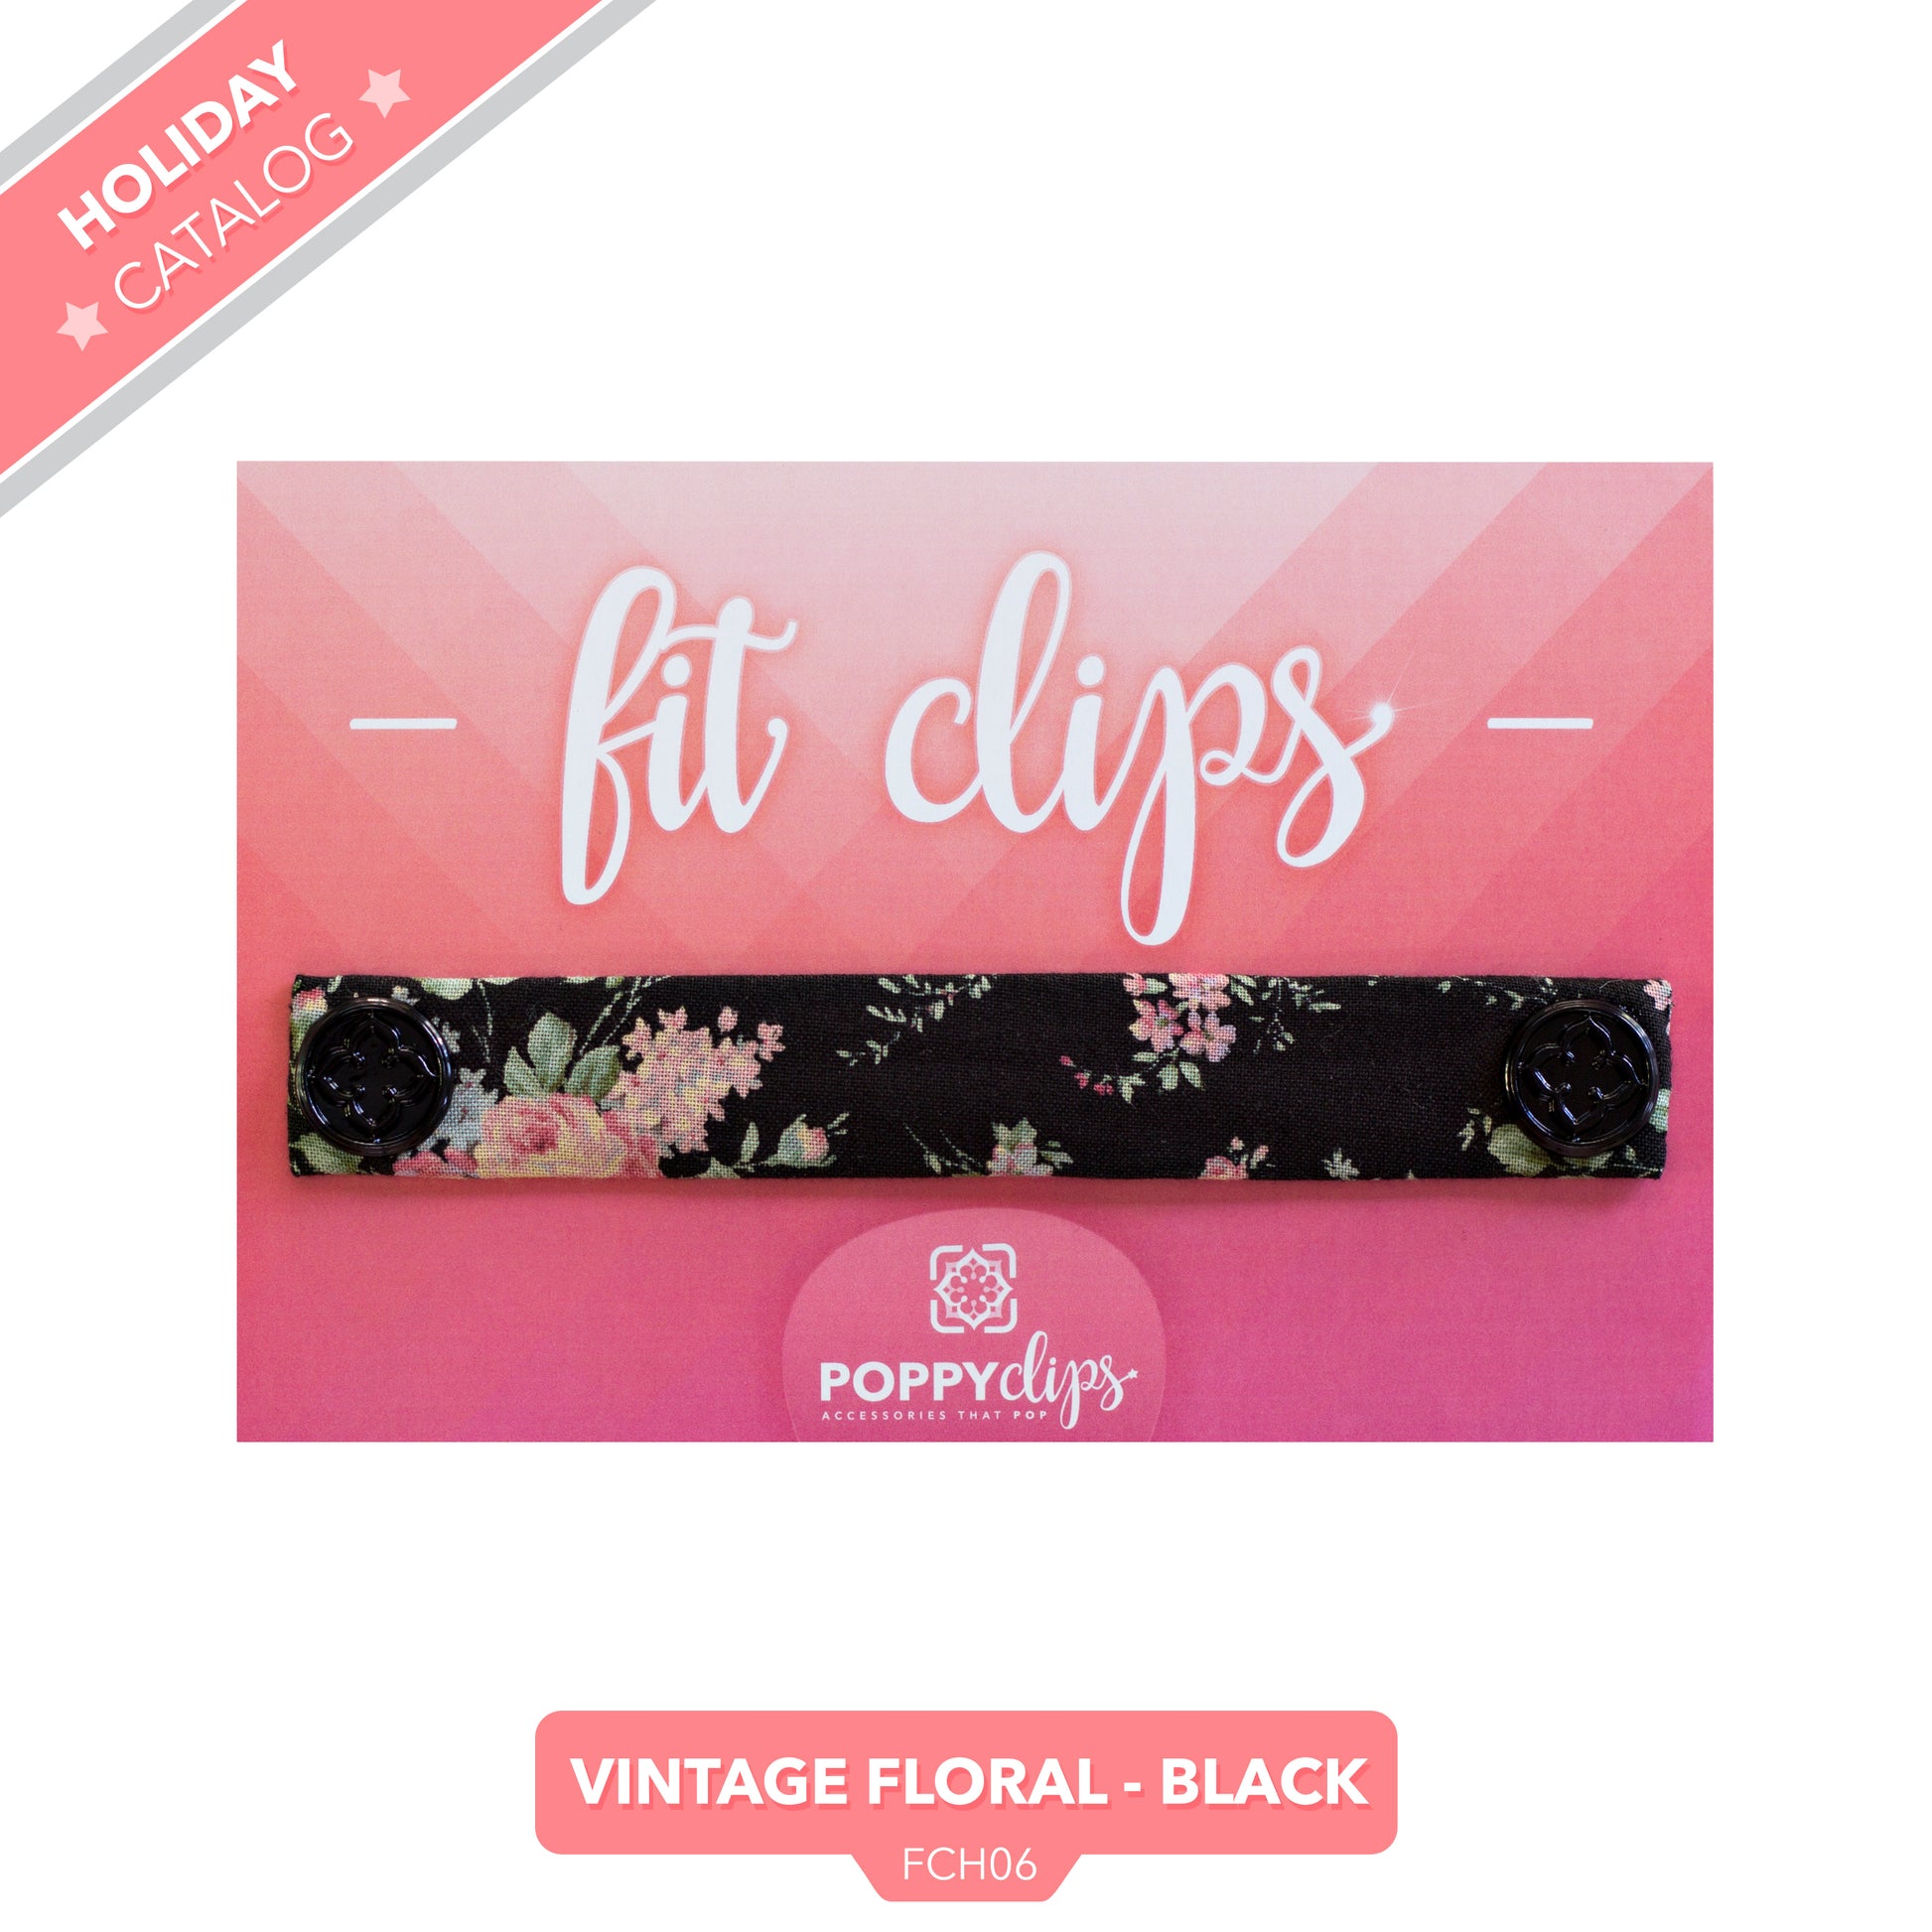 5 ¼” long by 7/8” wide black material with a vintage rose floral pattern in pink and green, and magnets at each end.  The outer magnets are a decorative black medallion with the company logo. 